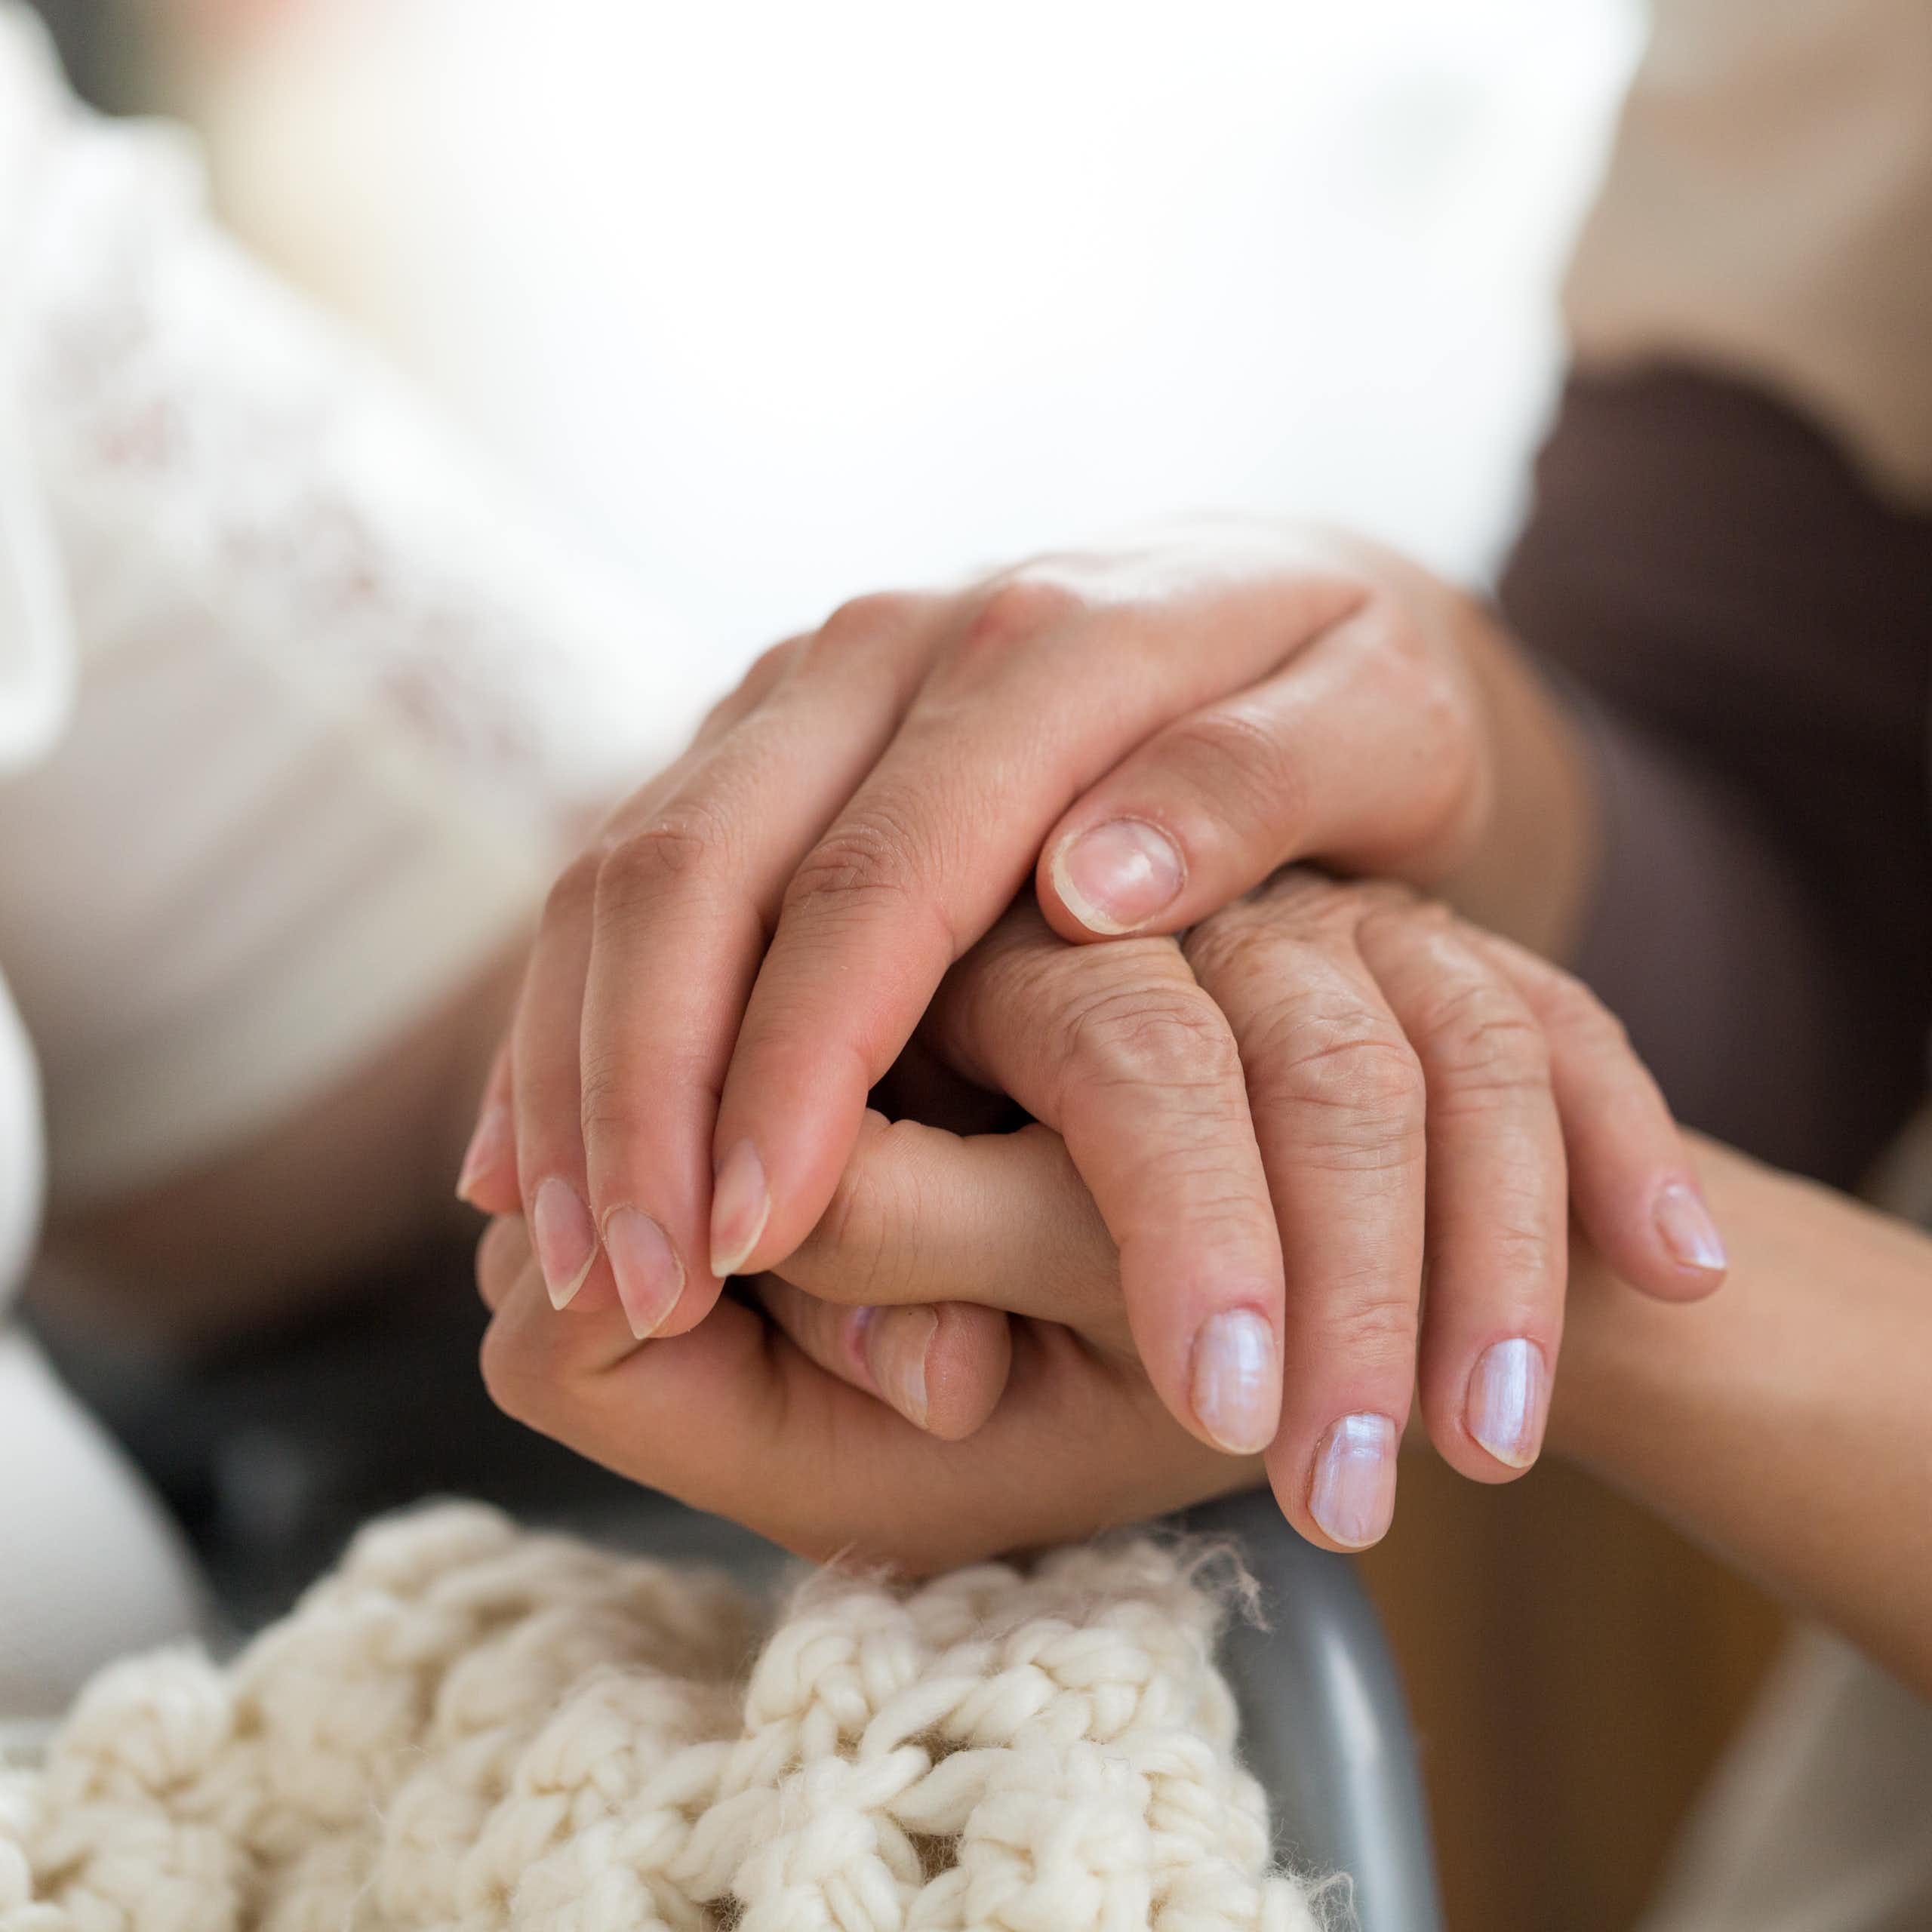 A close up of a young woman holding the hands of an older individual